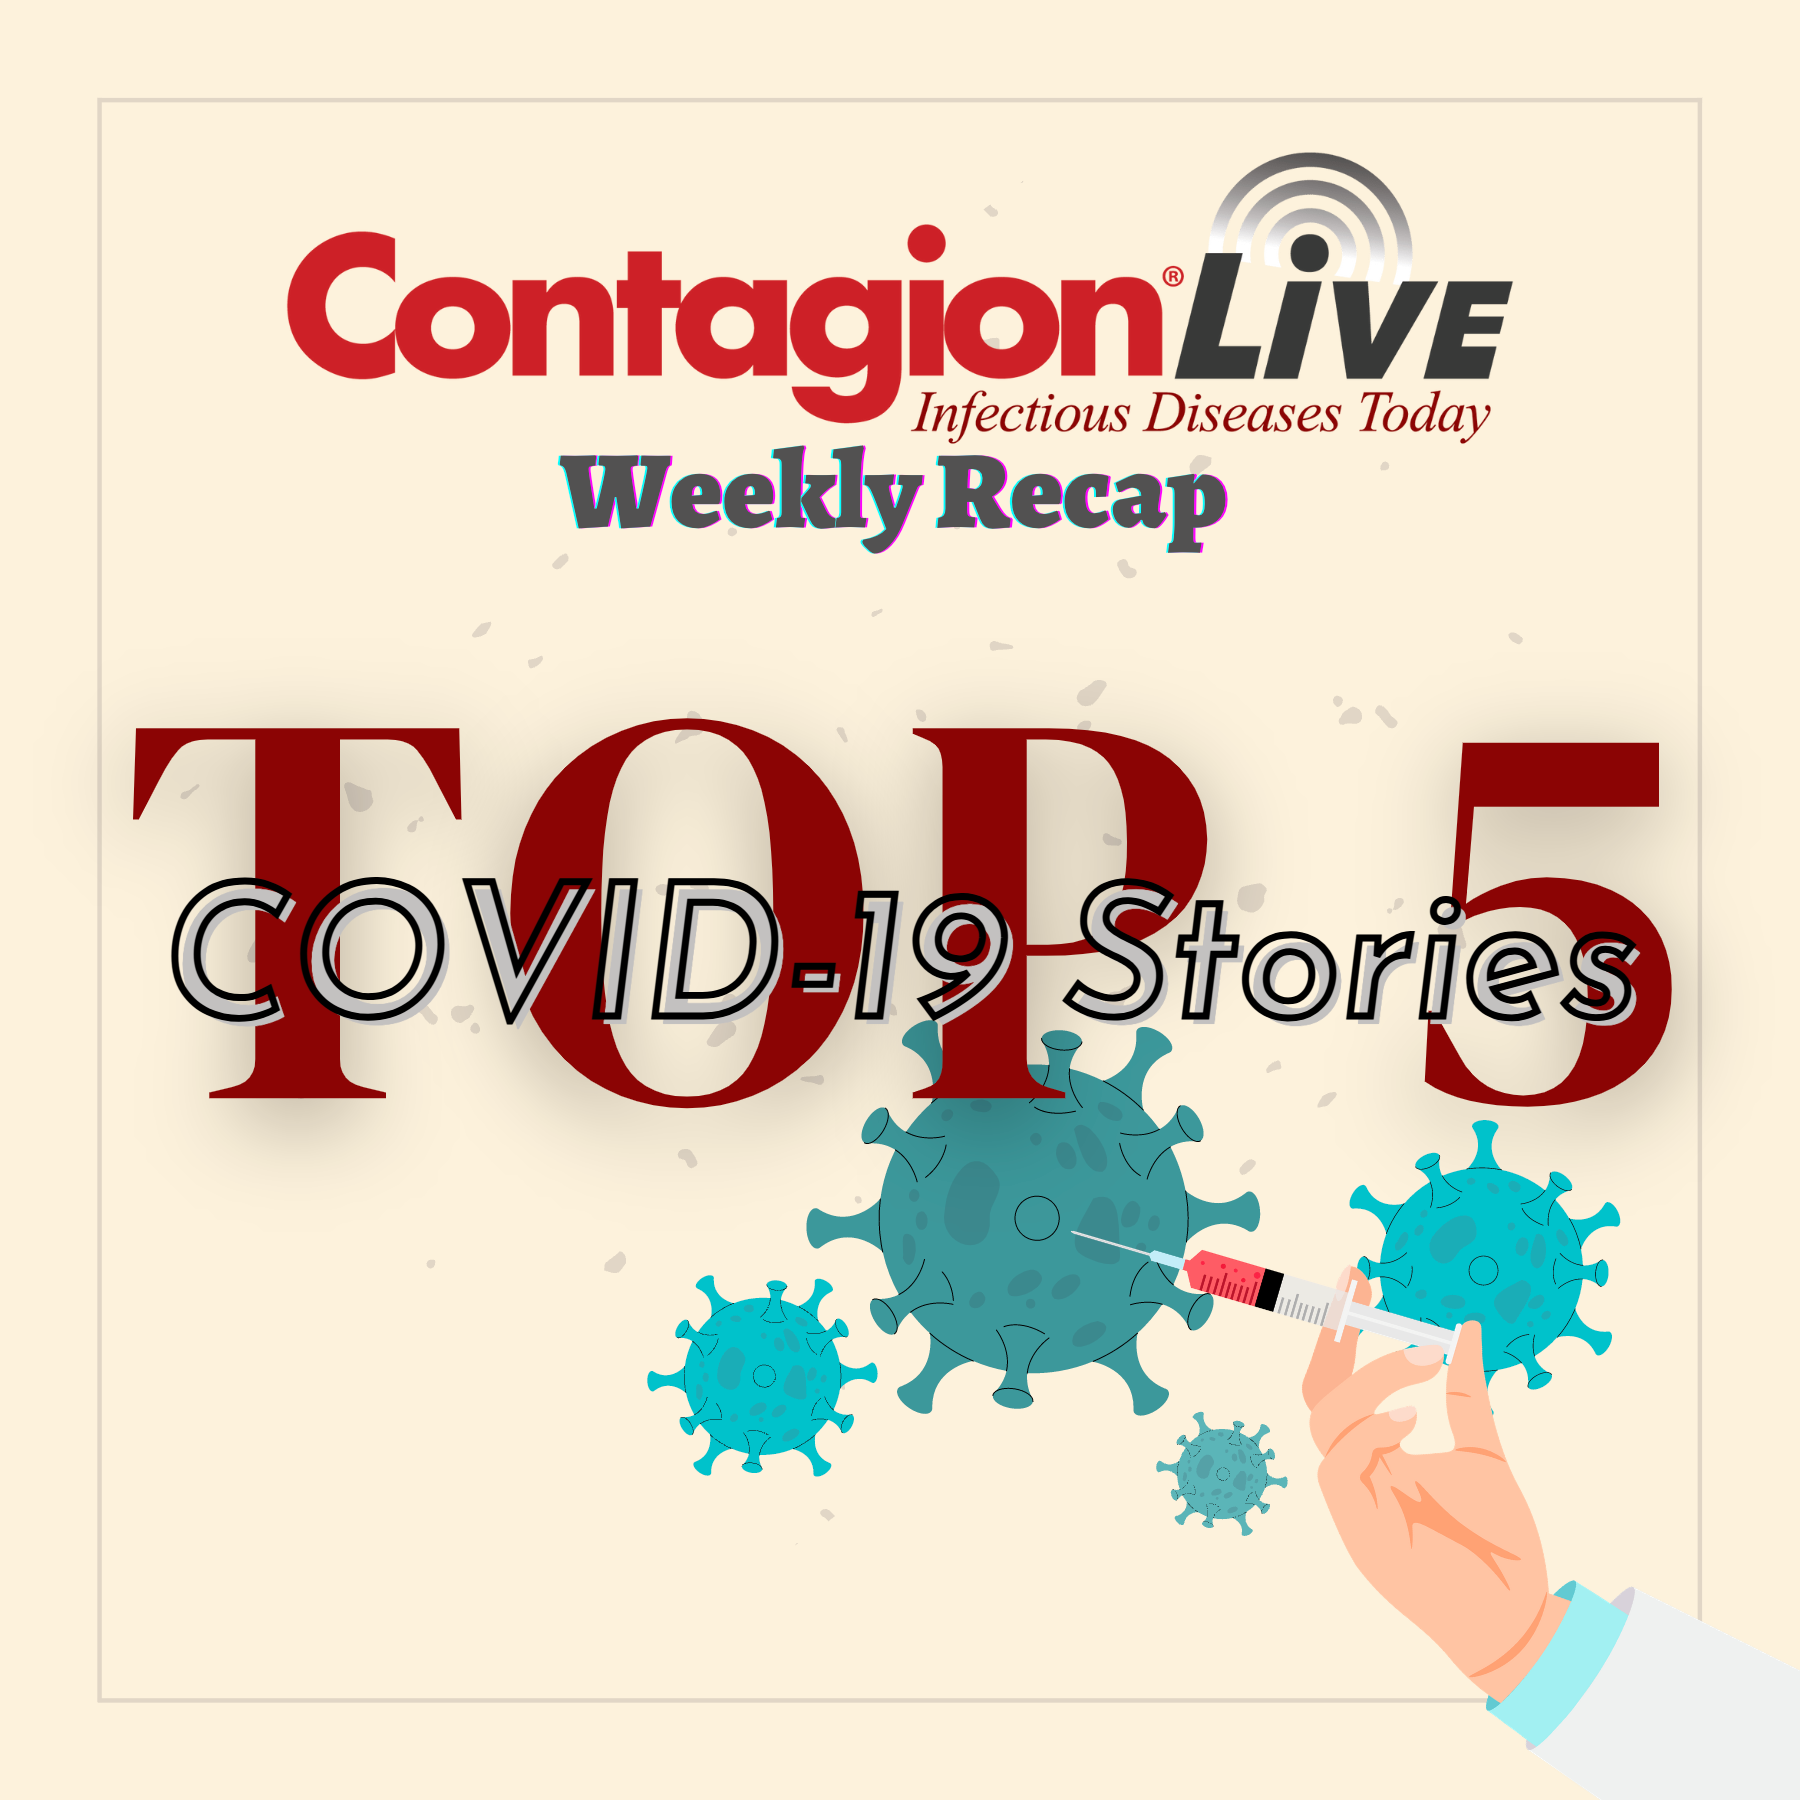 The Top 5 COVID-19 Stories This Week